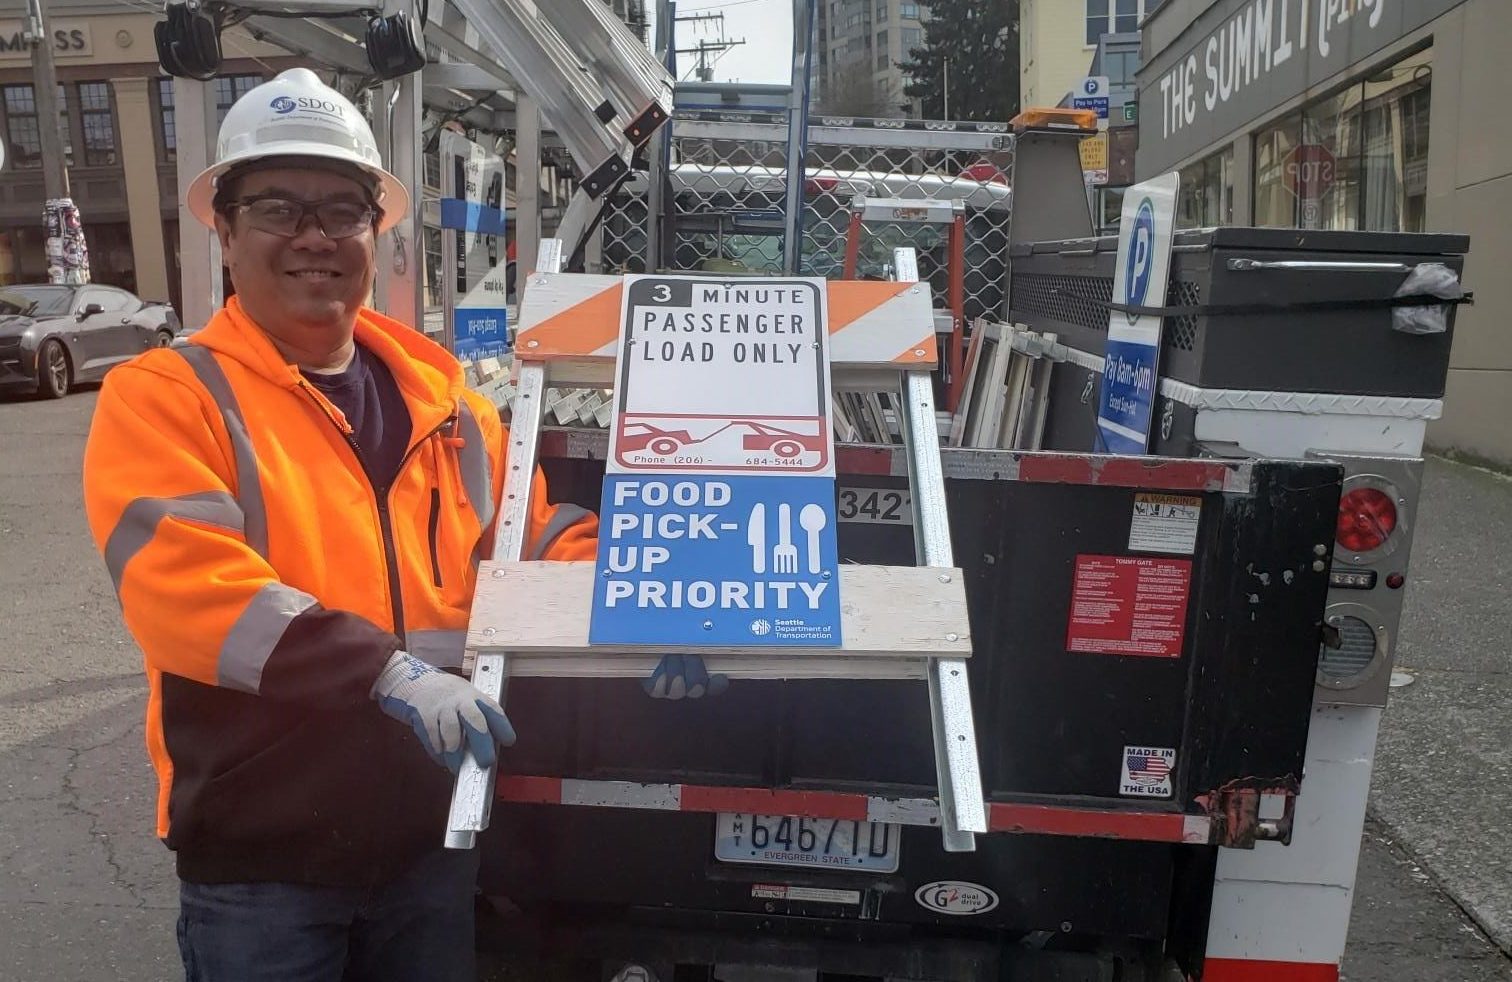 SDOT crews bringing out the new Food Pick-up Priority signs.